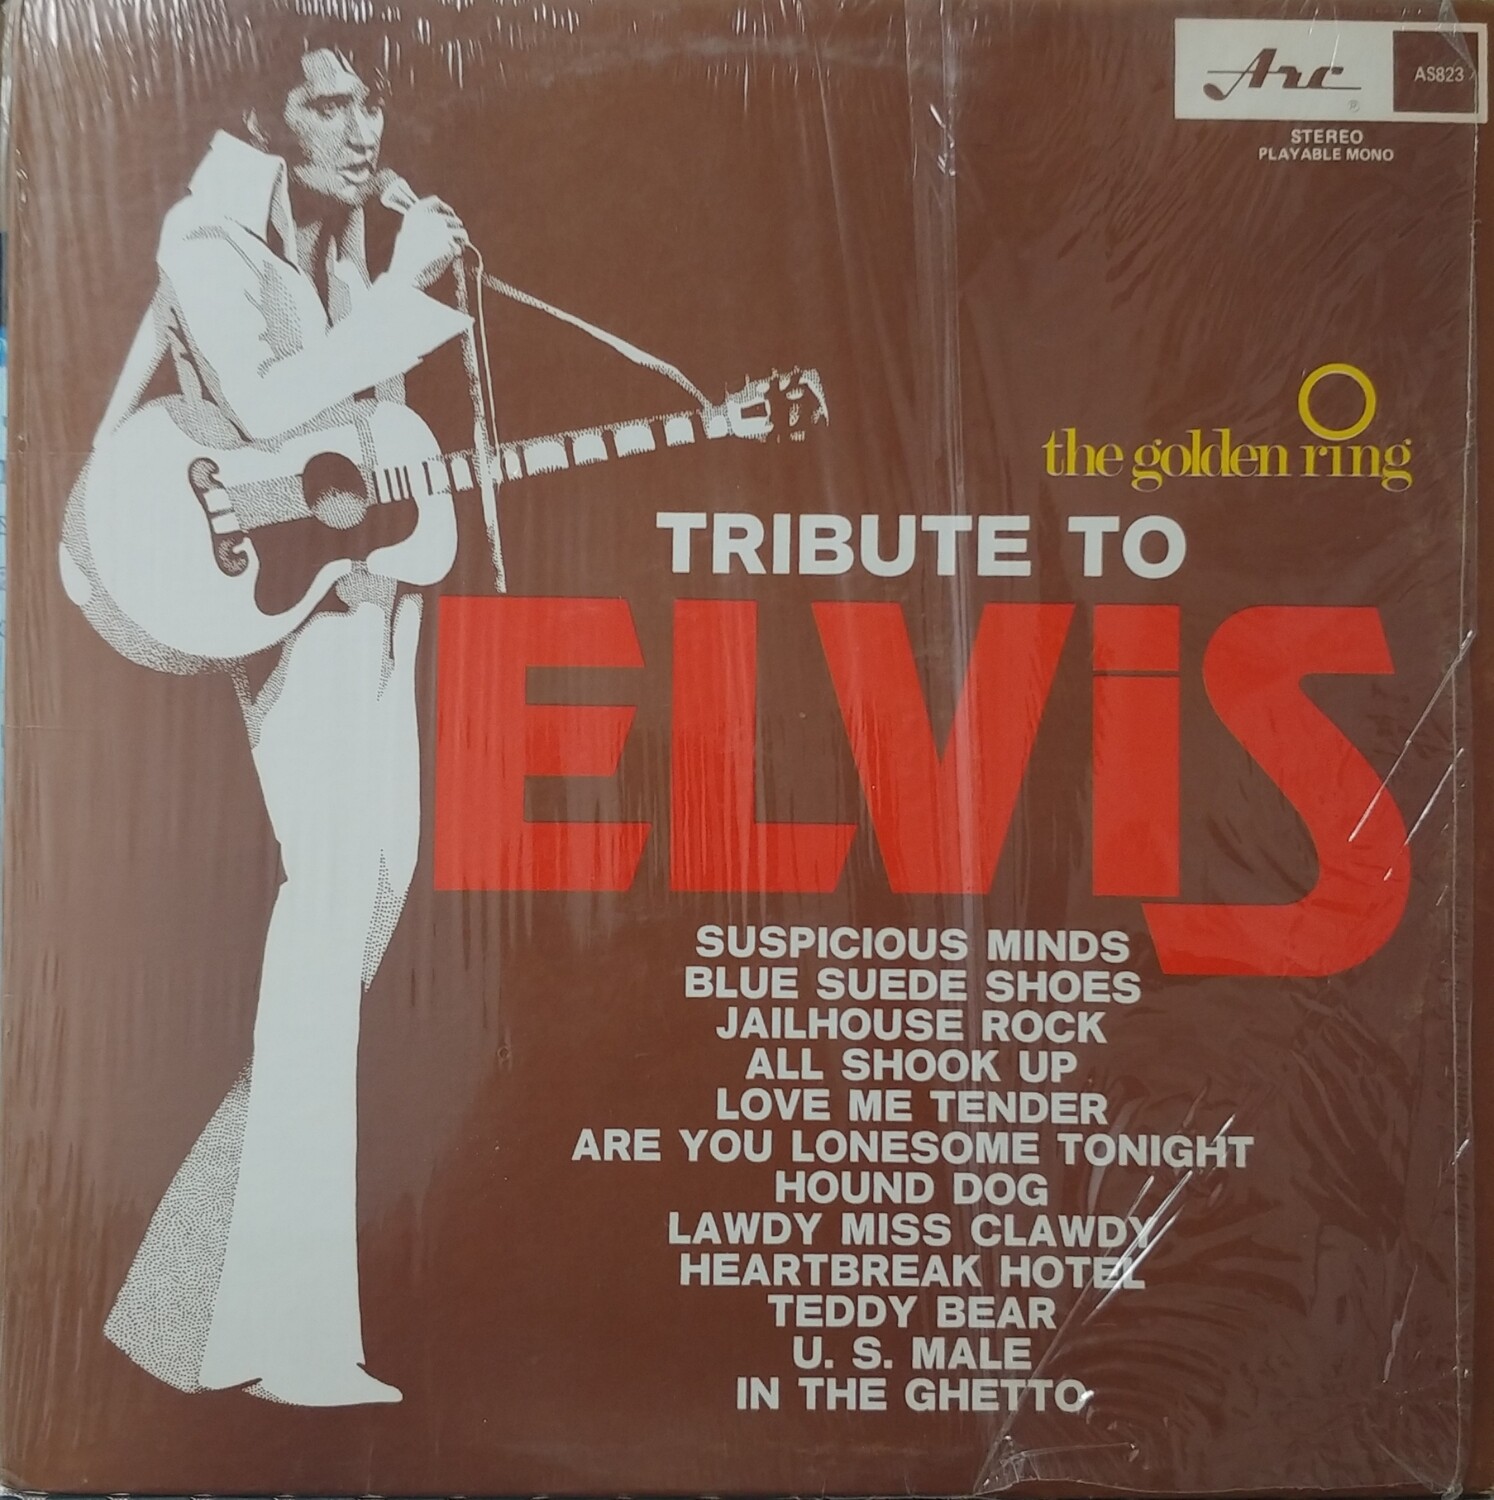 The Golden Ring - Tribute to Elvis